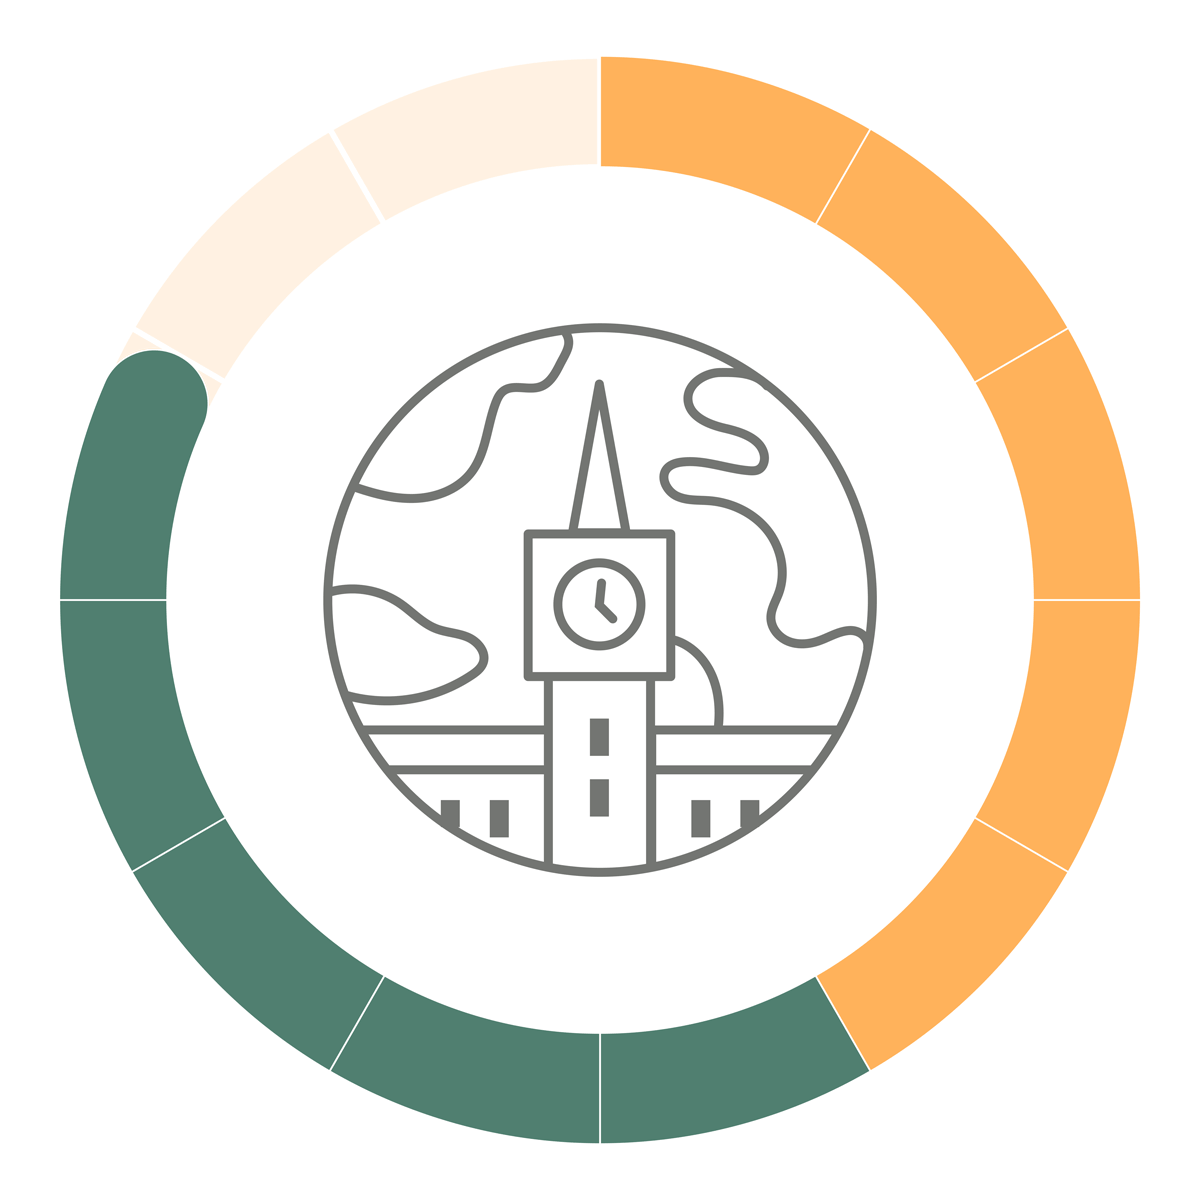 IAC’s Relationships and Governance progress icon with circular meter at 10/12 complete